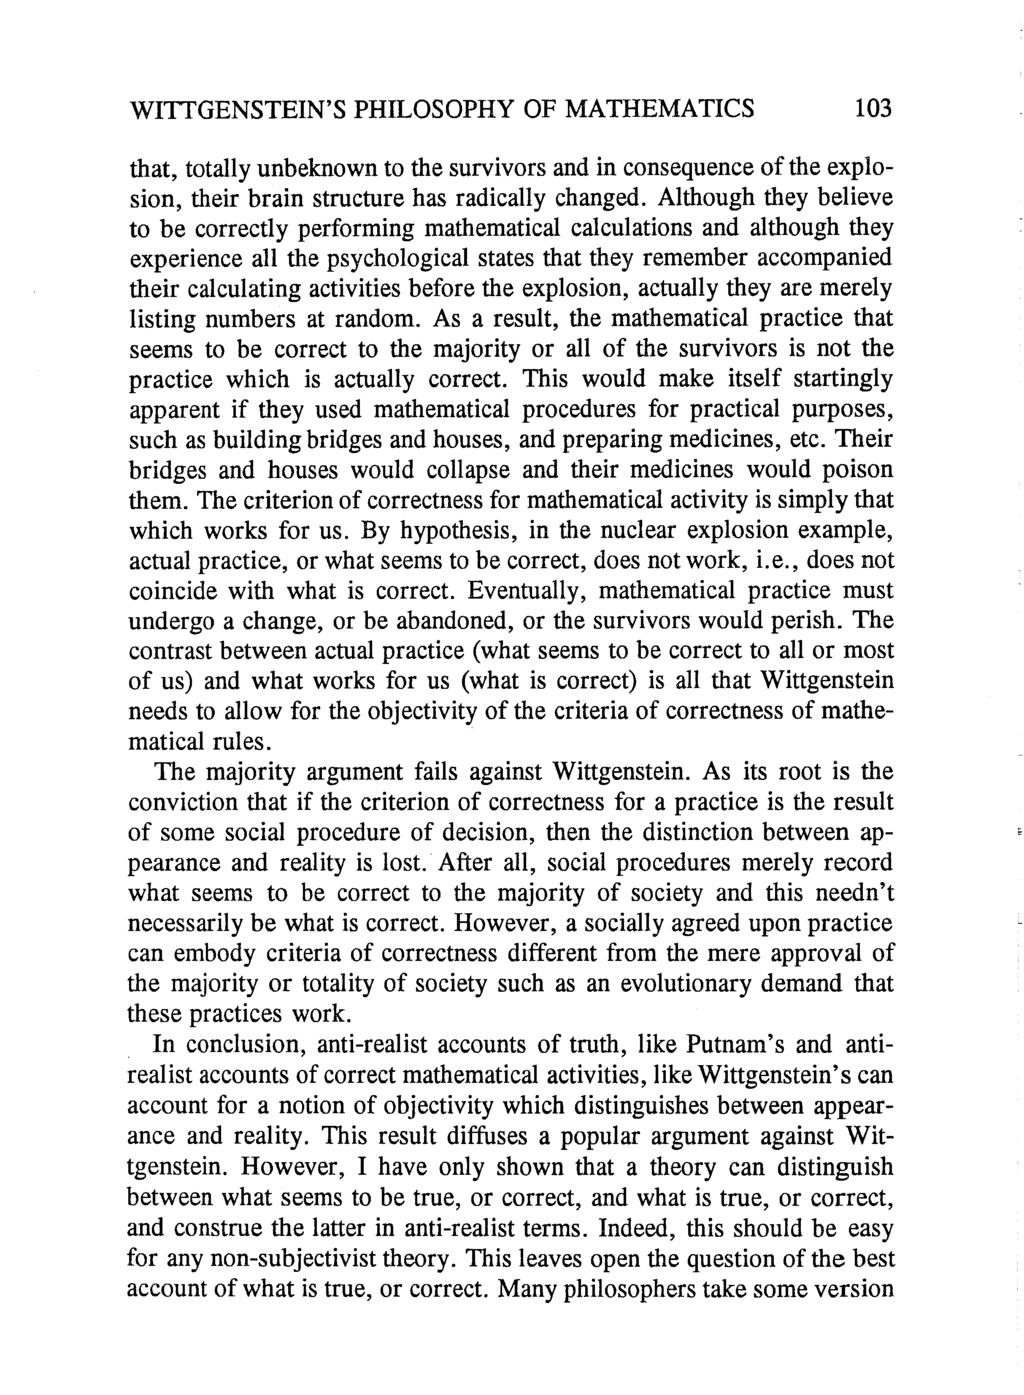 WITTGENSTEIN'S PHILOSOPHY OF MATHEMATICS 103 that, totally unbeknown to the survivors and in consequence of the explosion, their brain structure has radically changed.